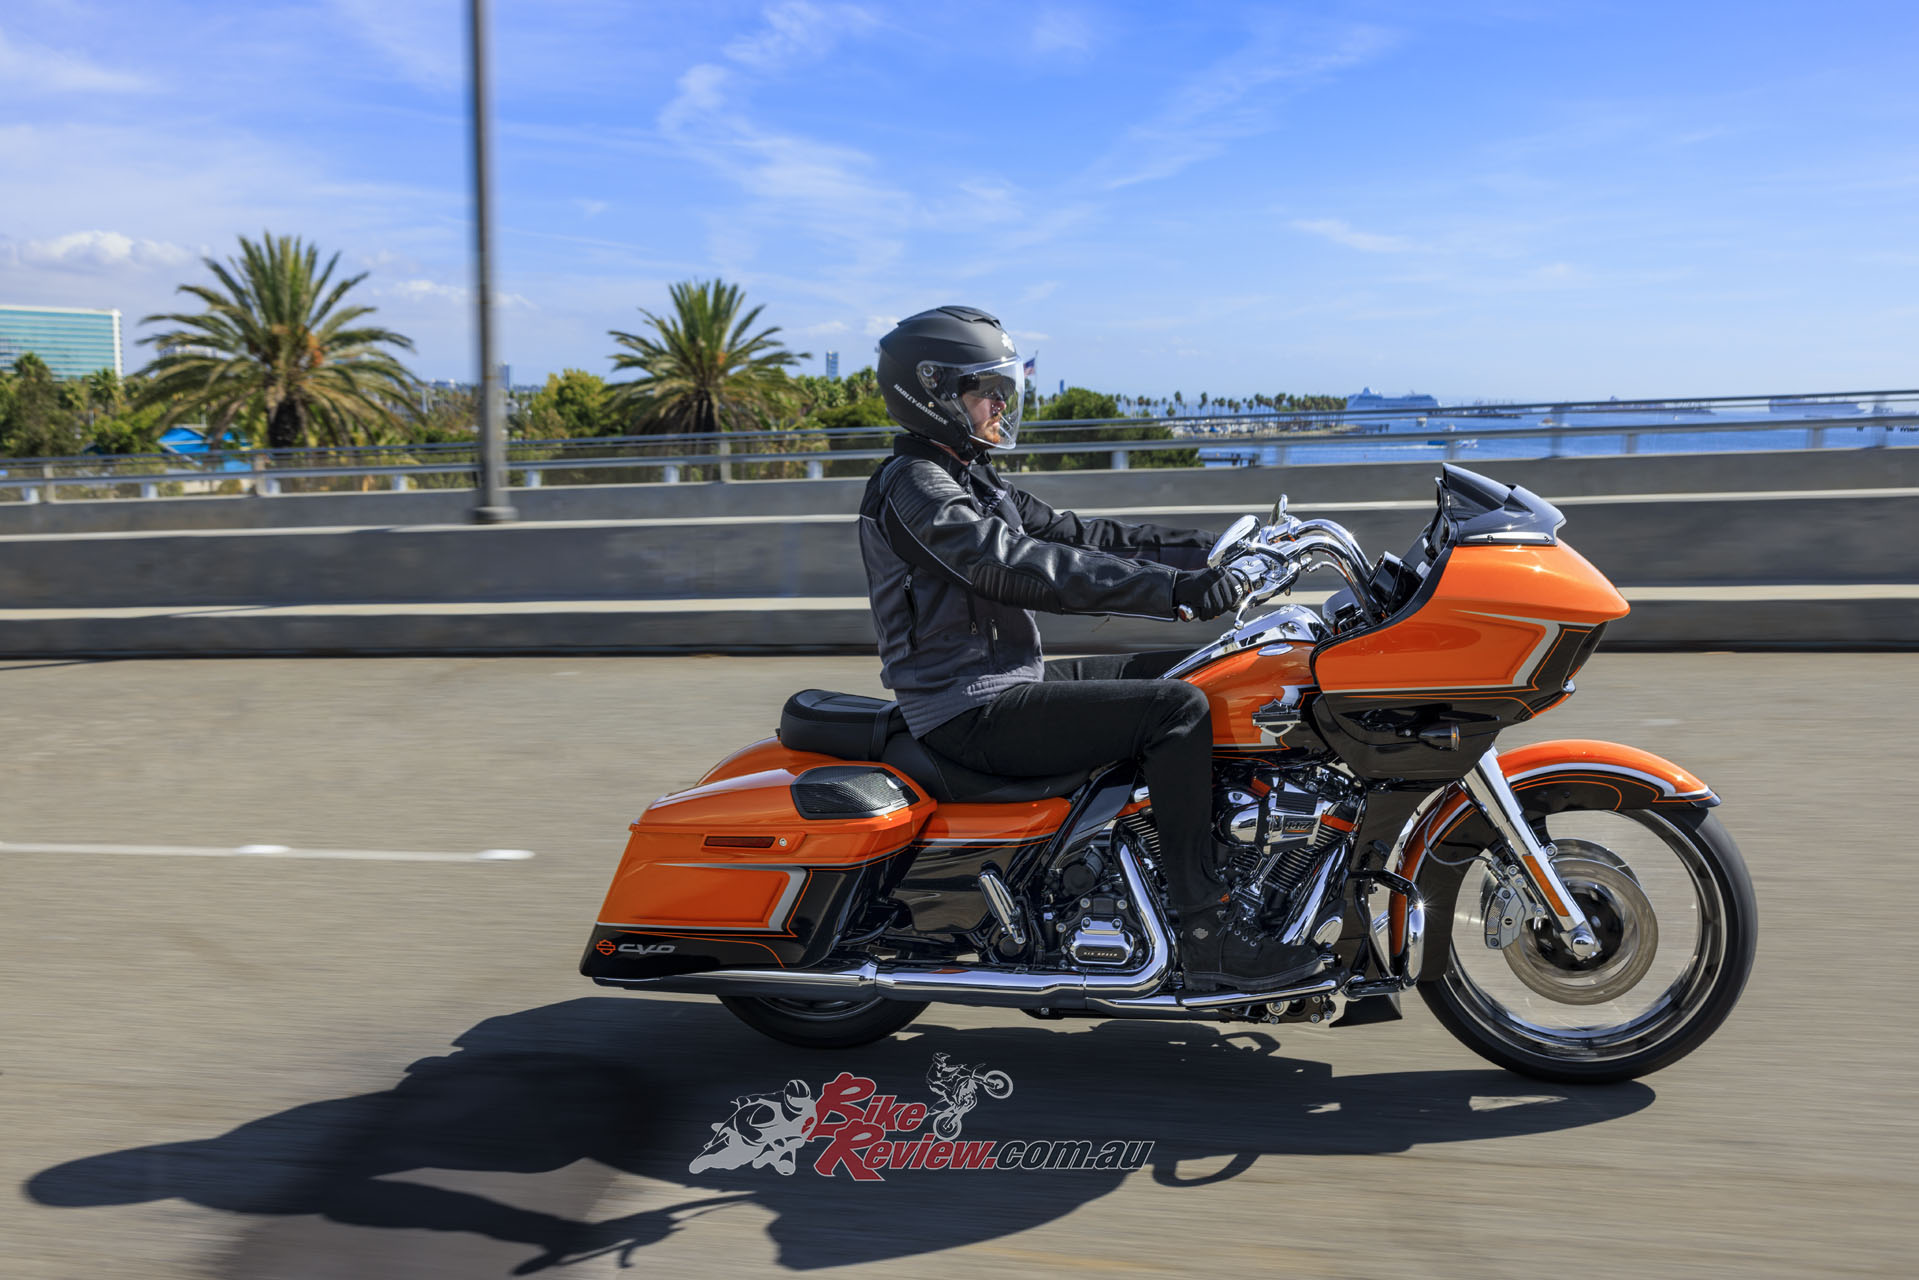 The CVO Road Glide model offers menacing style behind its distinctive dual LED headlamps and frame-mounted shark nose fairing, and the unrelenting performance of the Milwaukee-Eight 117 powertrain.